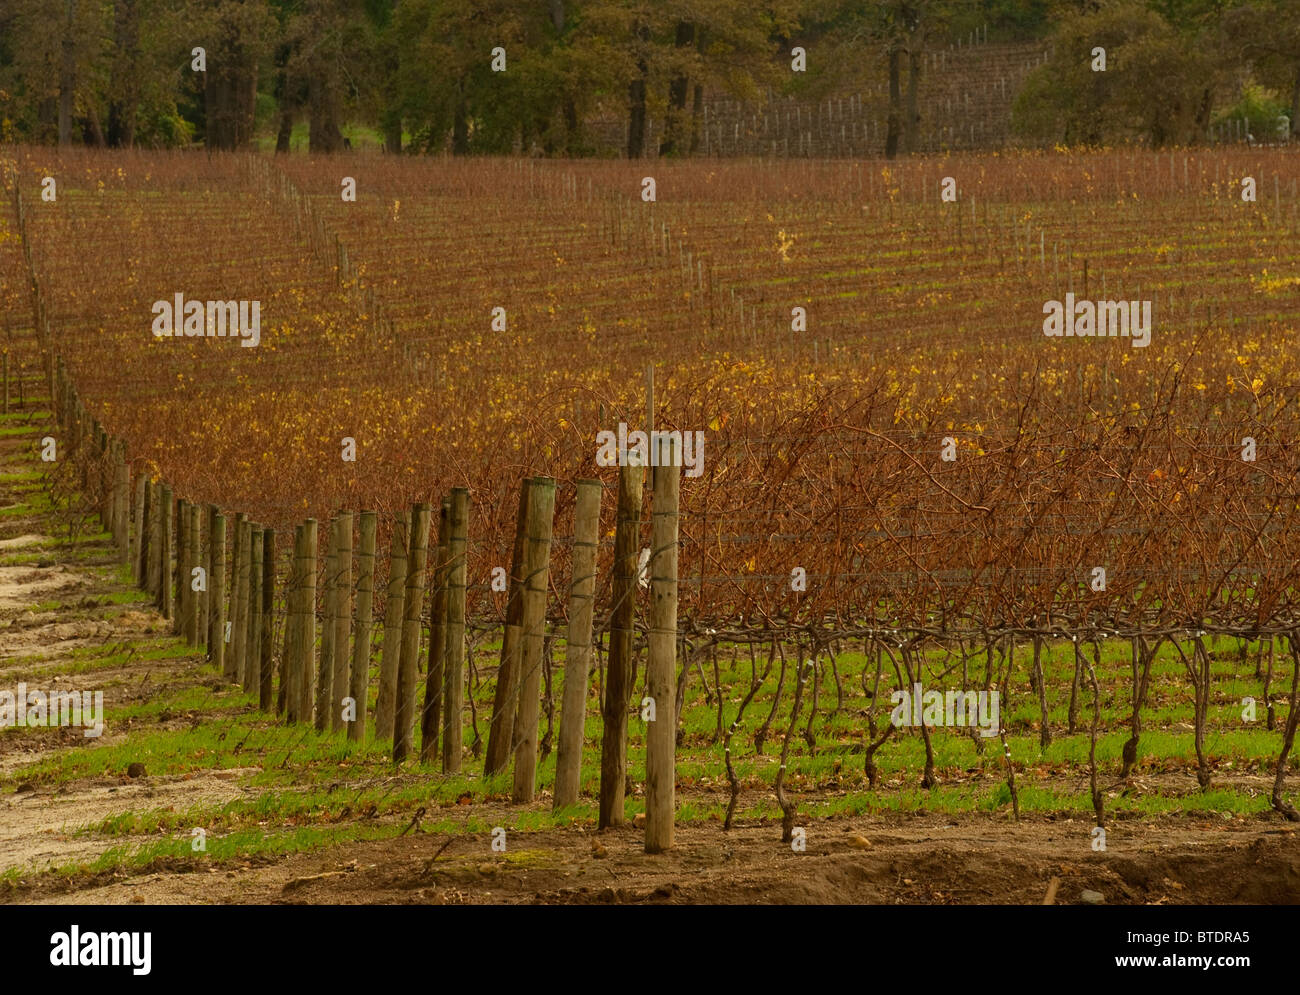 Vineyard with vines that have lost their leaves as the season changes Stock Photo